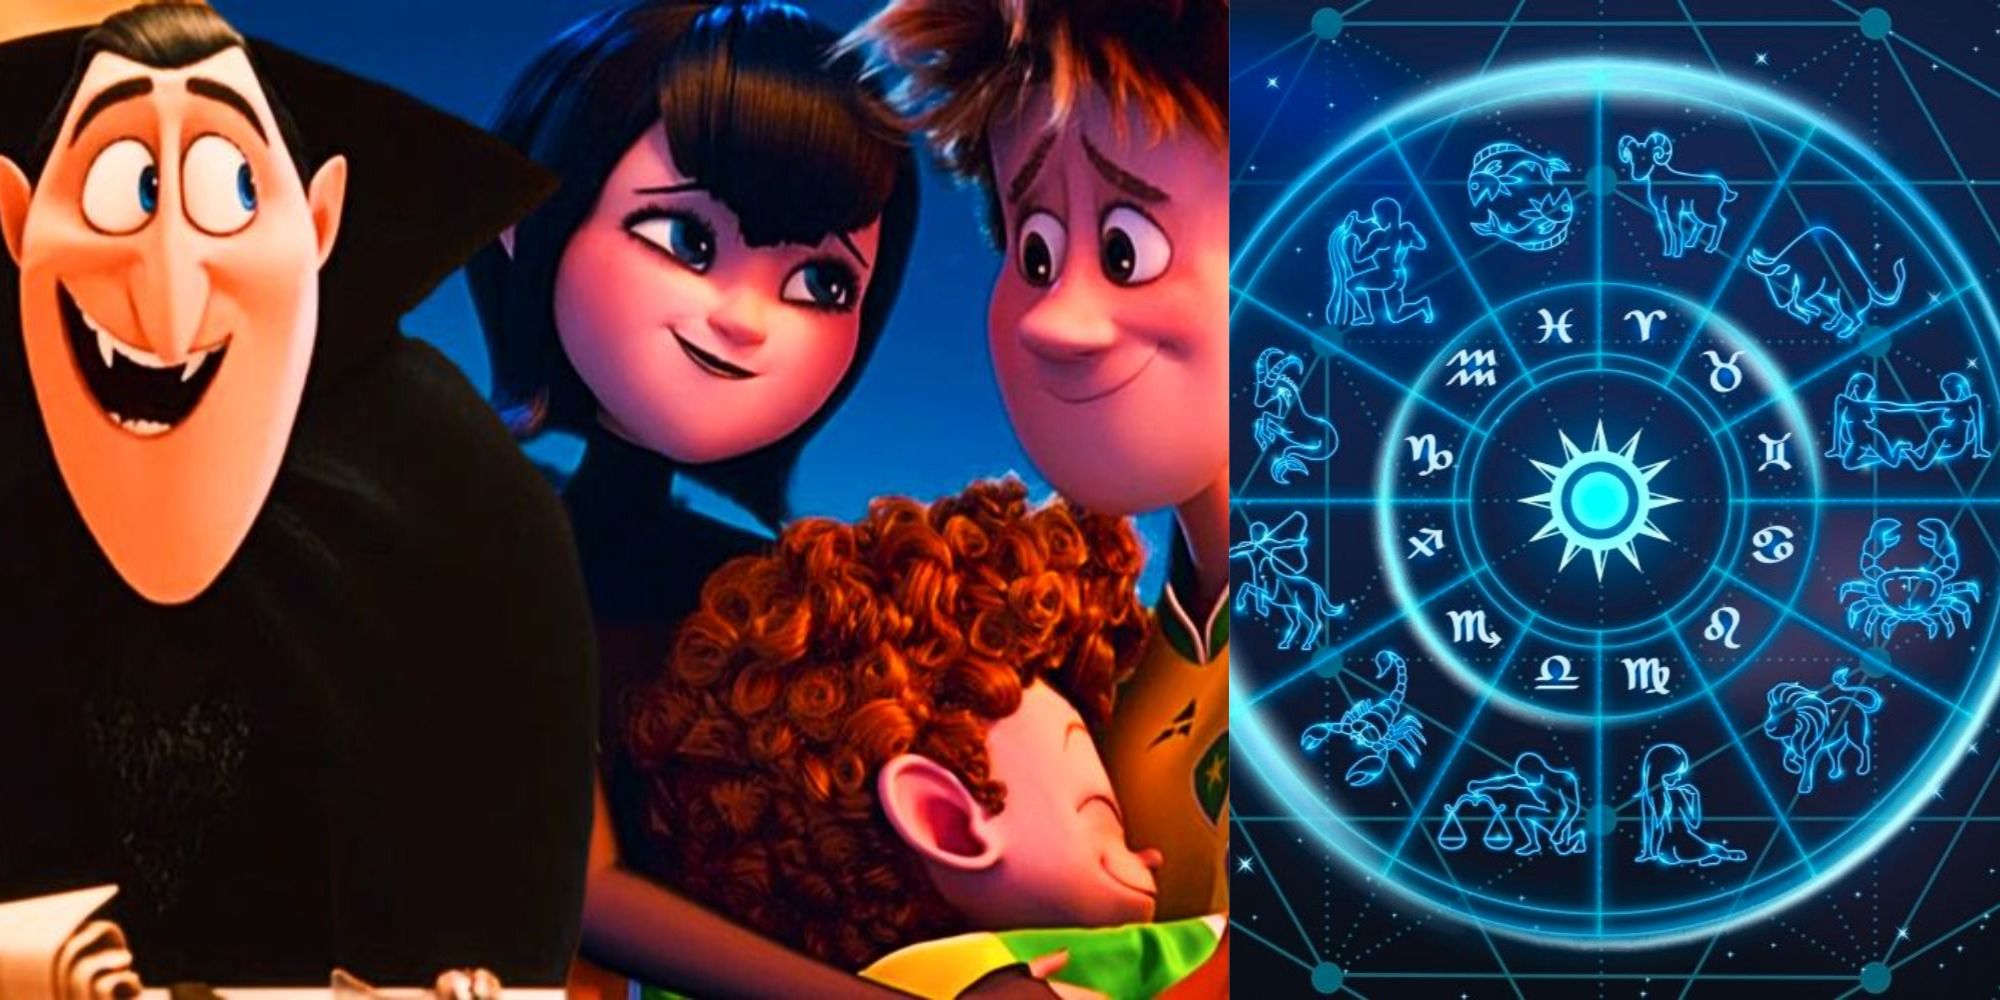 Three side by side images of a zodiac wheel and characters from Hotel Transylvania.